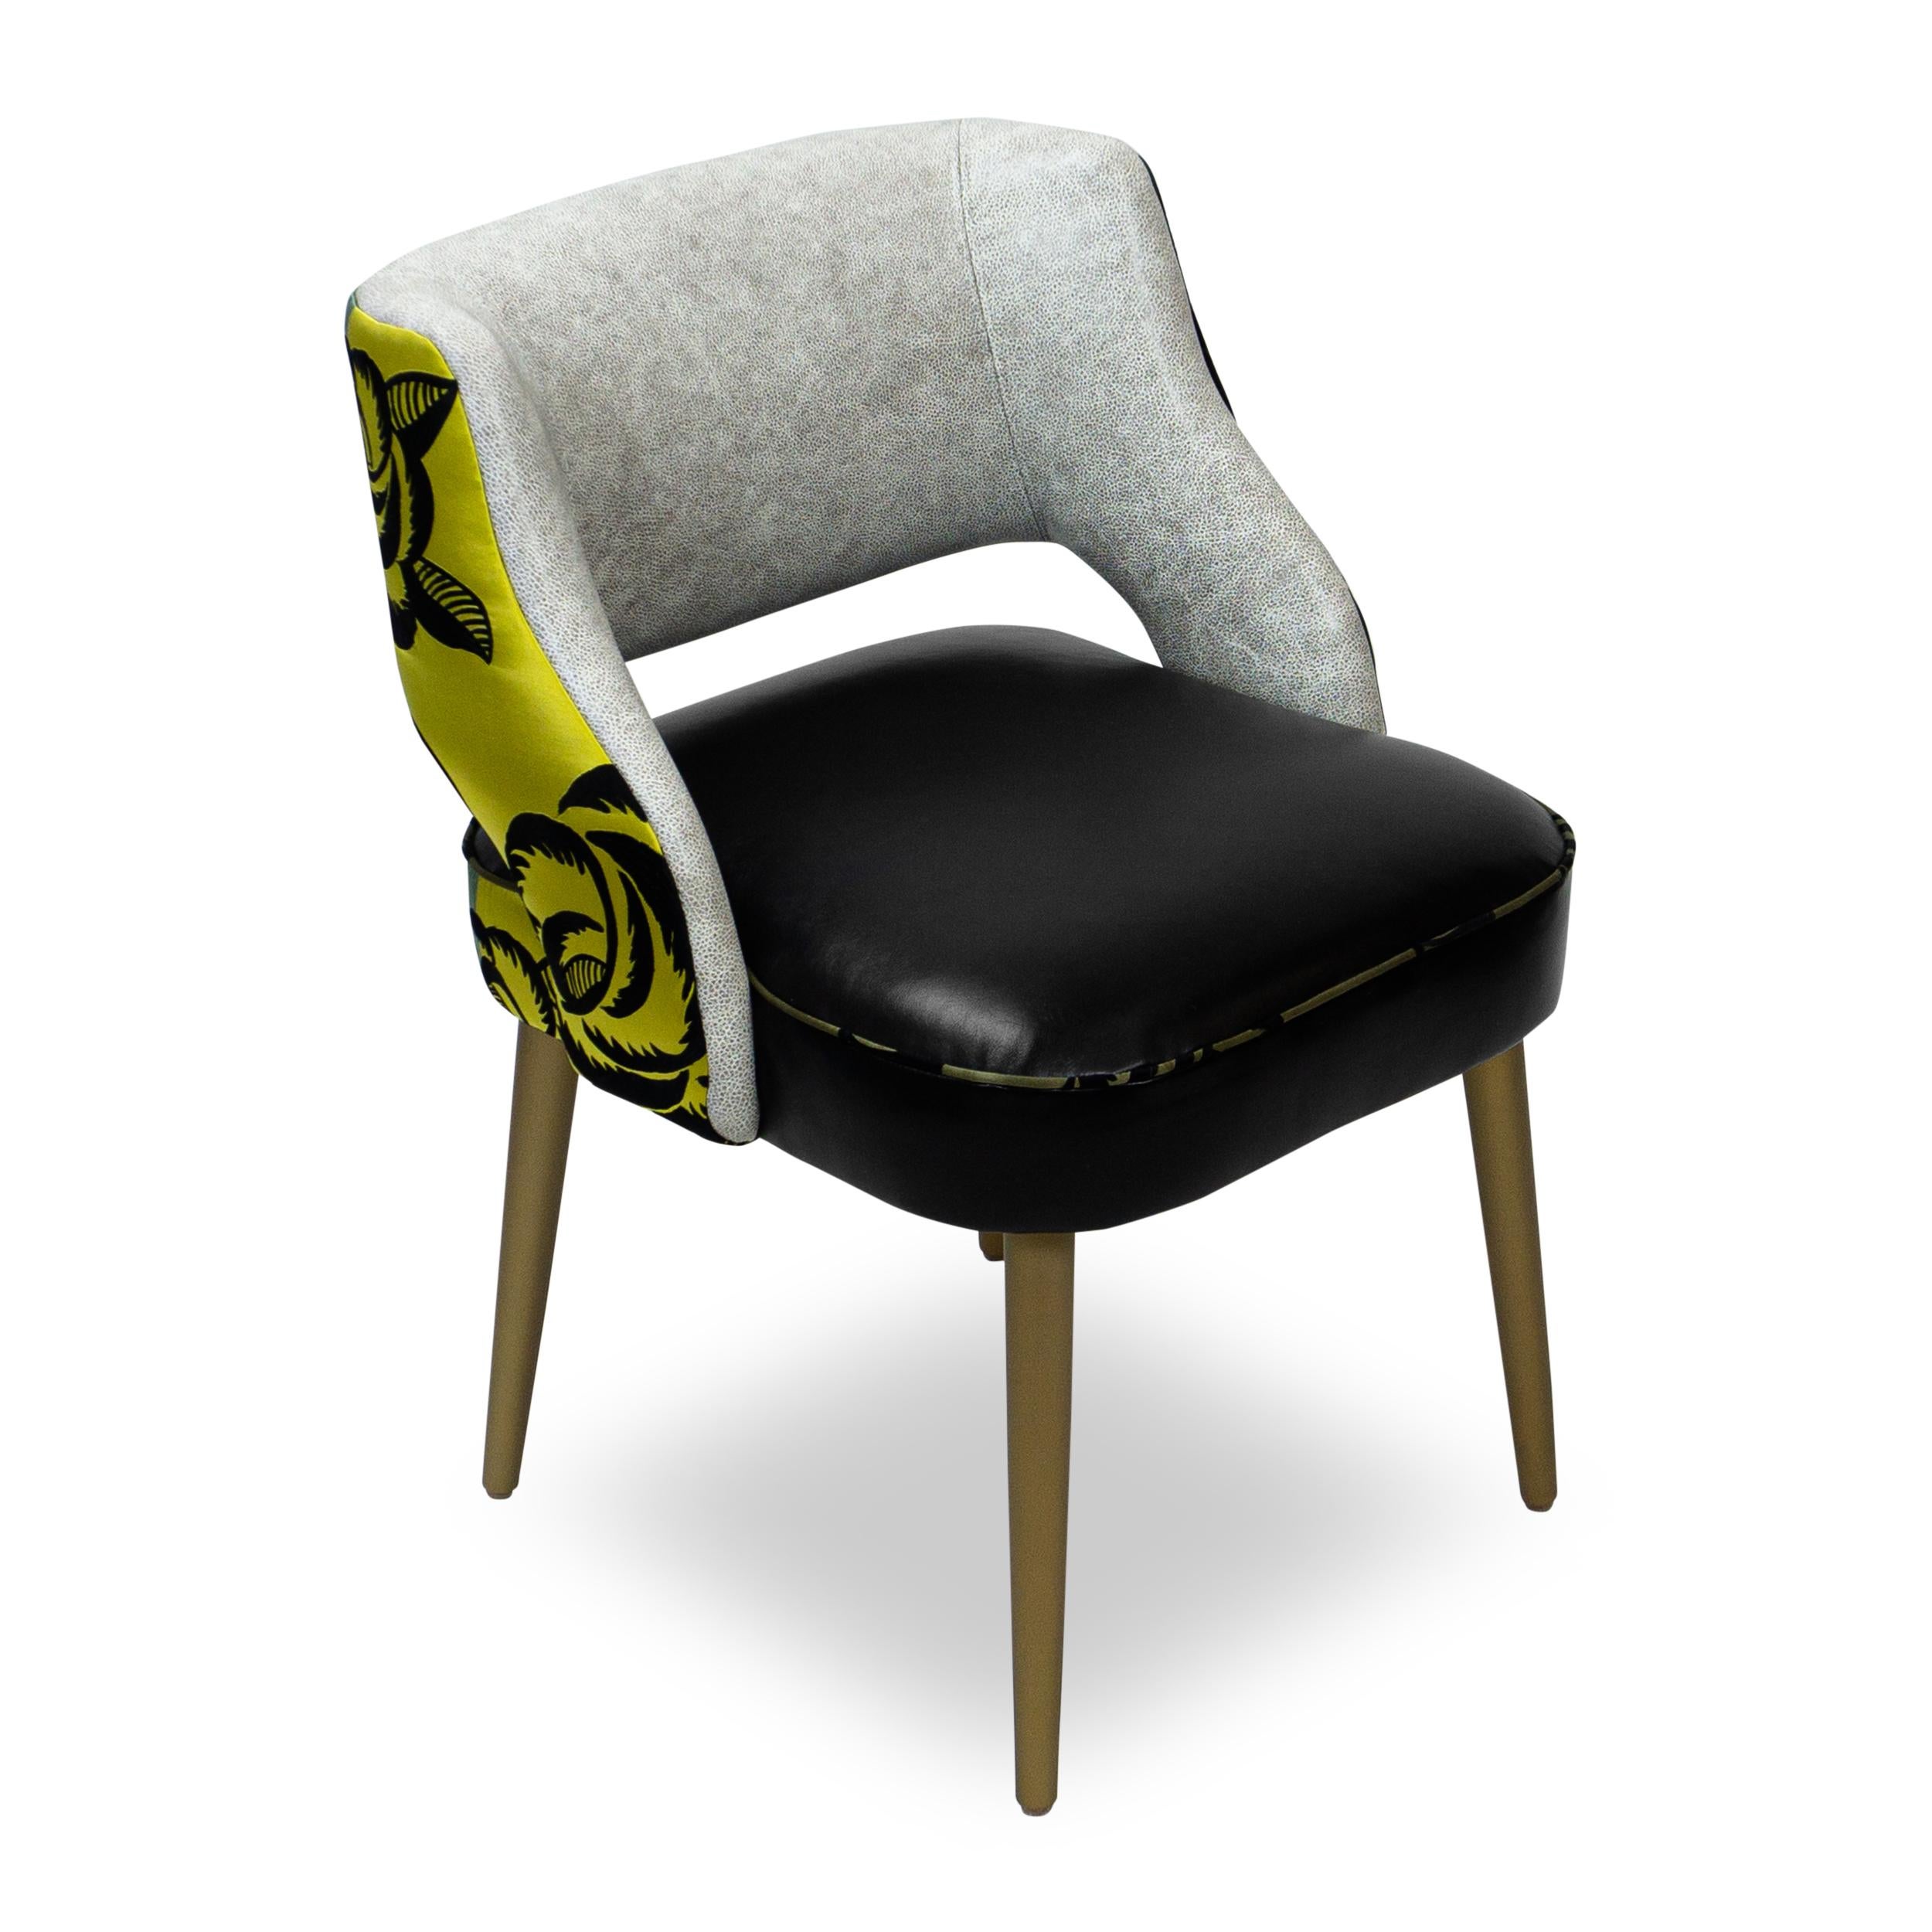 Original dining chair design with black faux leather seat, pebbled grey faux leather inside back and large scale floral jacquard outside back and contrast welting. Legs sprayed with a pearlized faux metallic paint. Our best selling design, this